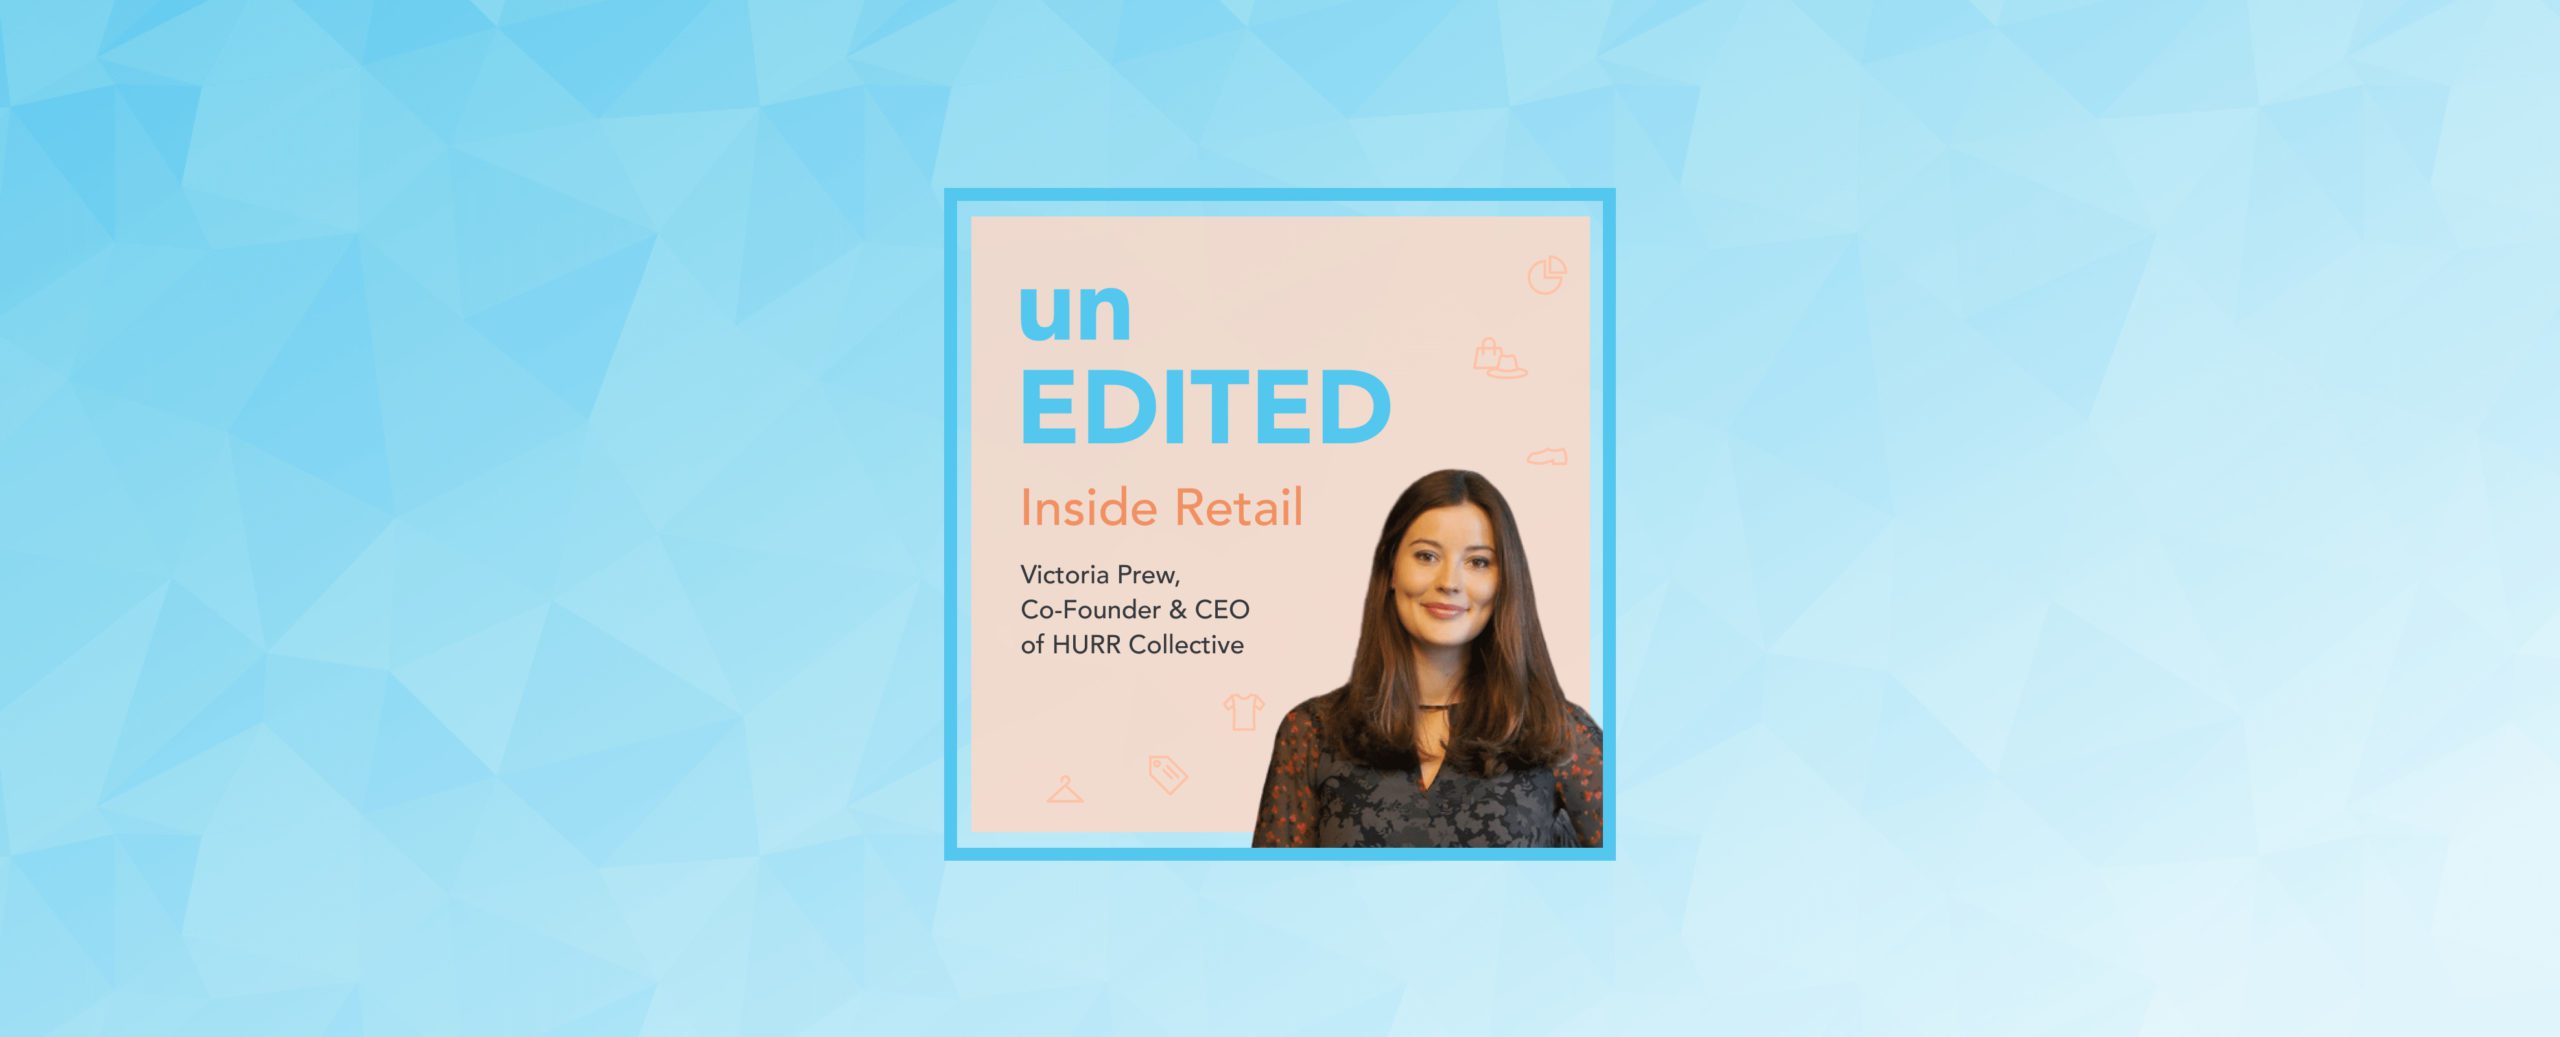 Podcast EP.8: How retail rental is influential to the circular movement ft. Victoria Prew, Co-Founder and CEO of HURR Collective | EDITED